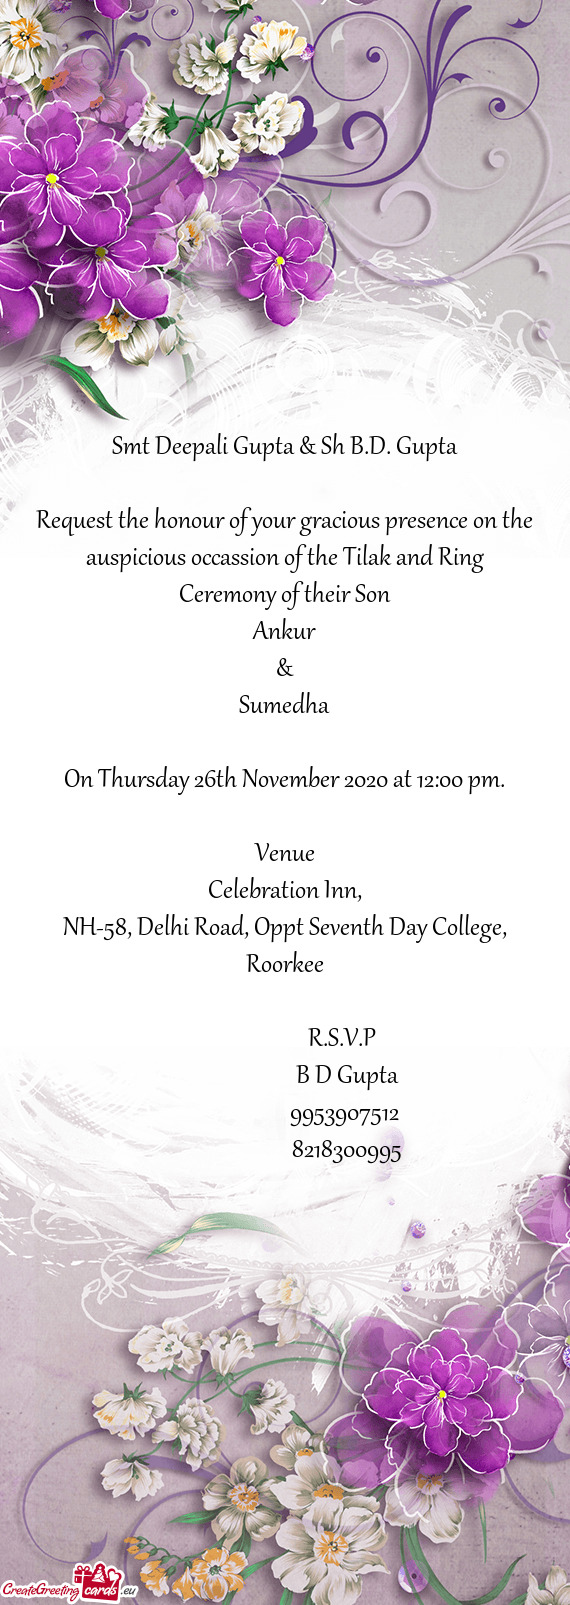 Request the honour of your gracious presence on the auspicious occassion of the Tilak and Ring Cerem